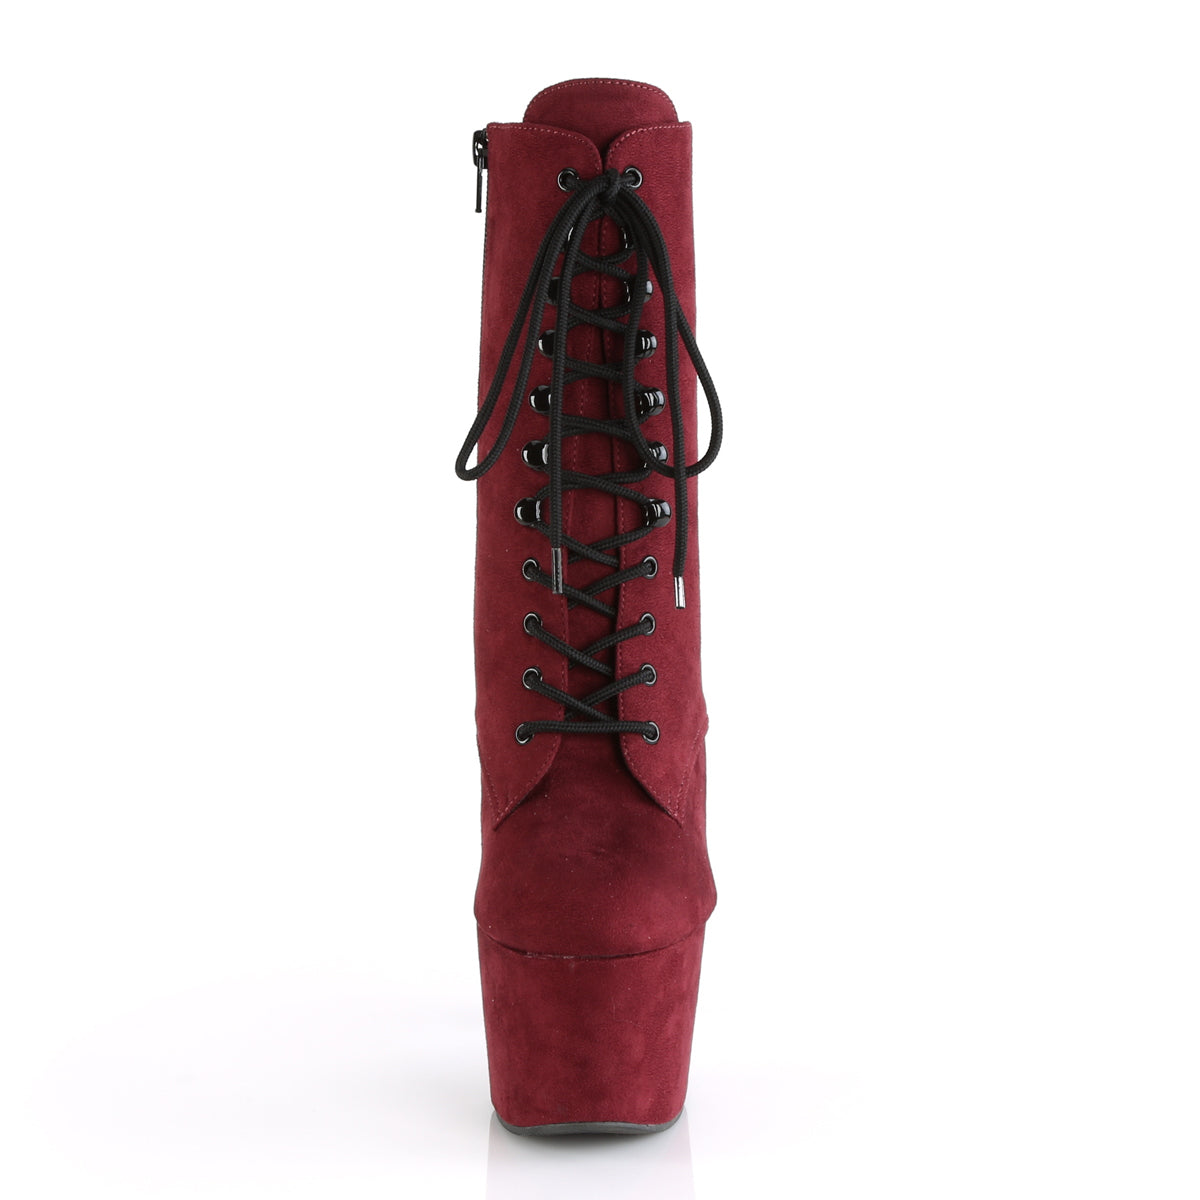 Pleaser Womens Ankle Boots ADORE-1020FS Burgundy Faux Suede/Burgundy Faux Suede